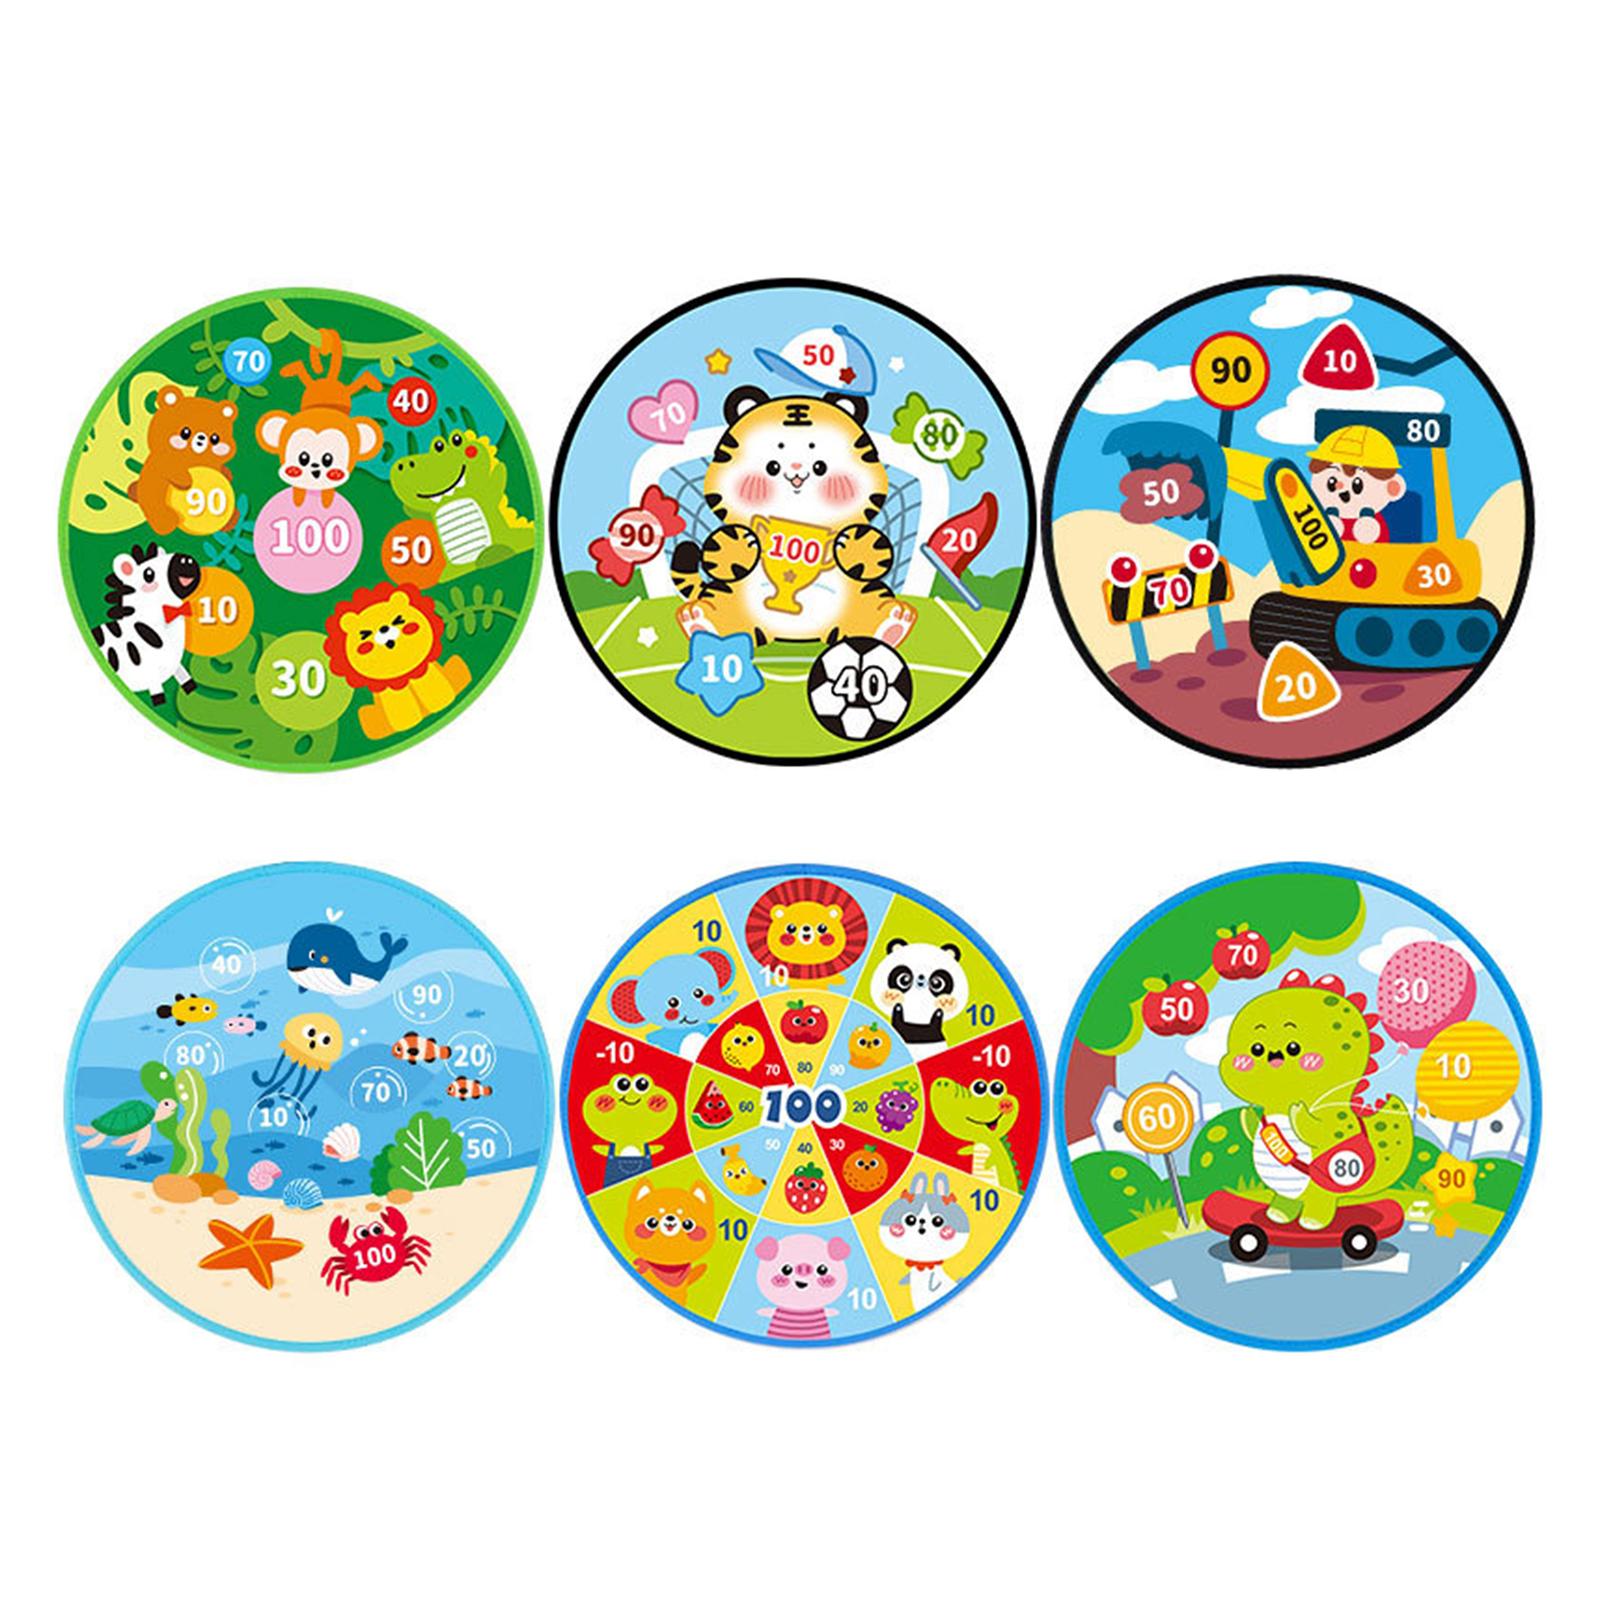 Cartoon board Toys Home Wall Mounted with 8 Sticky Balls Games sports